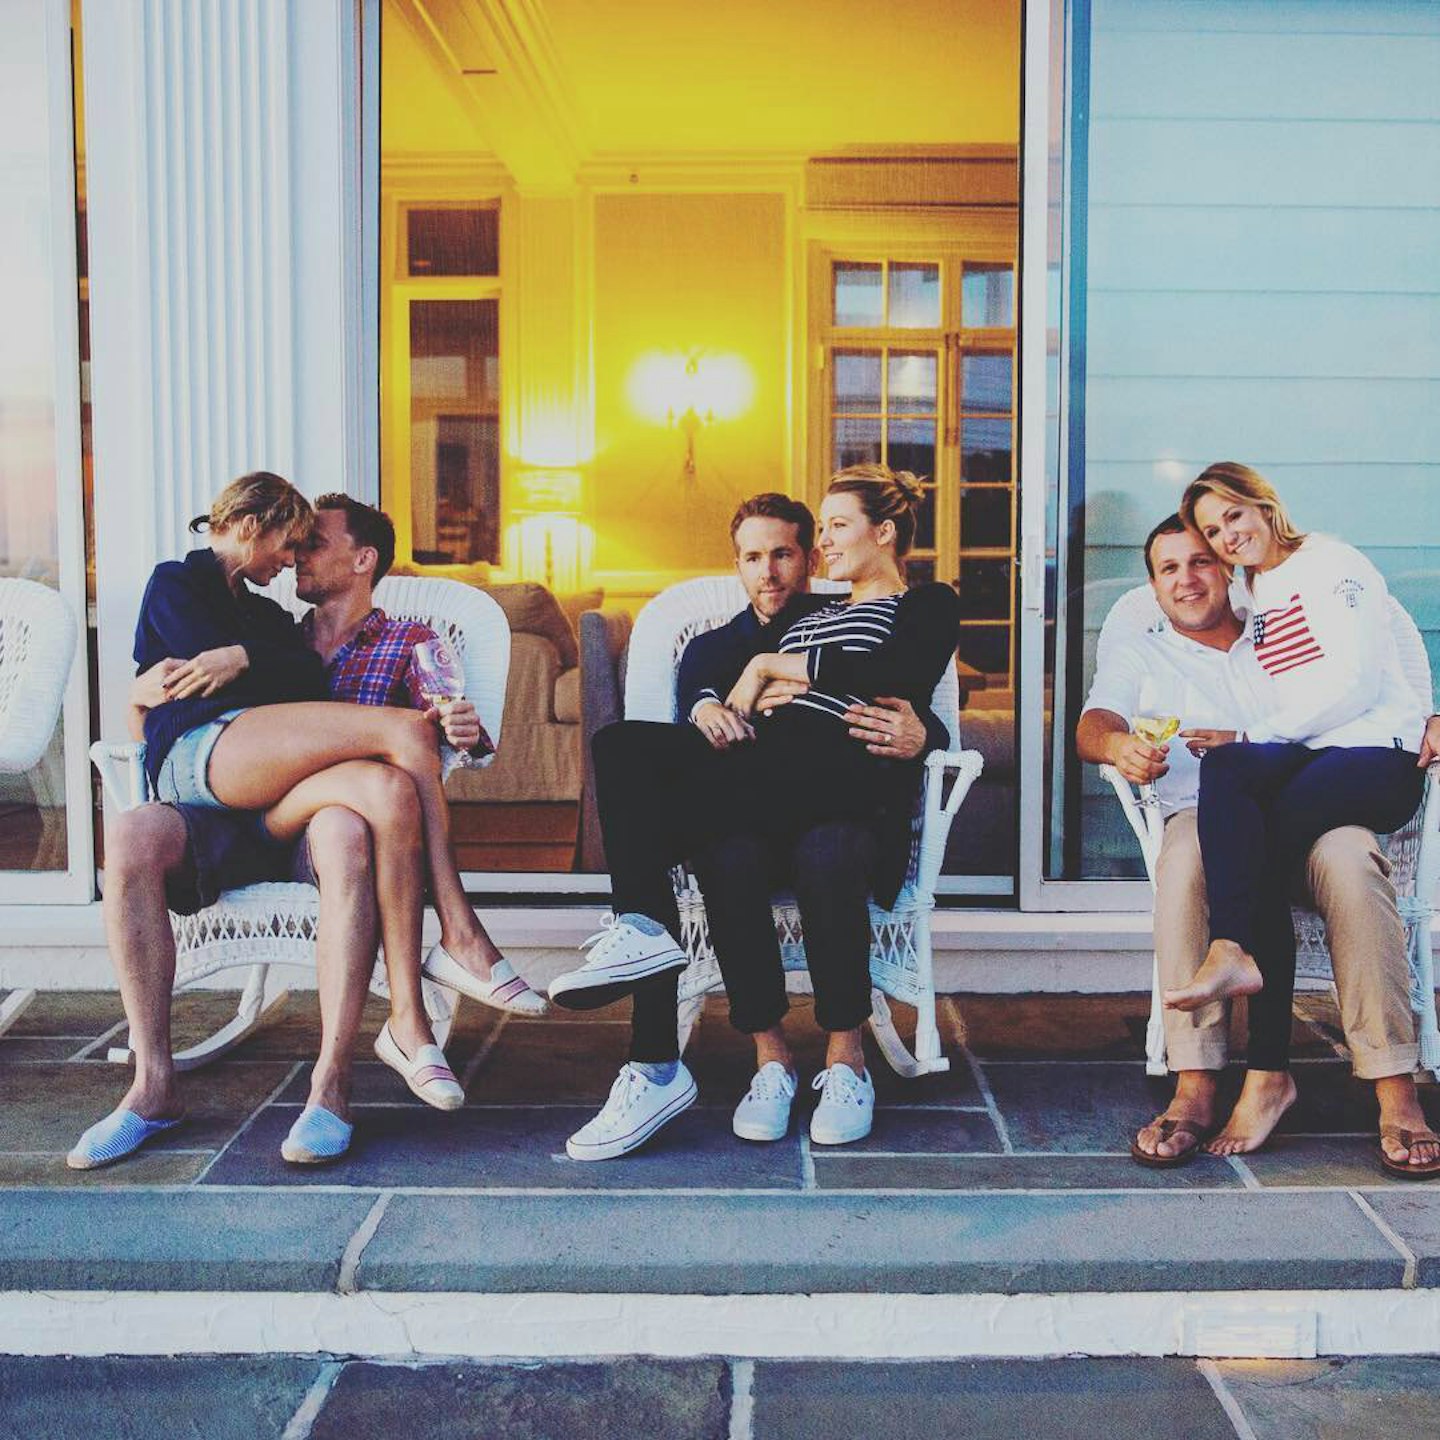 taylor swift tom hiddleston cuddle up to make their instagram debut during 4th of july party